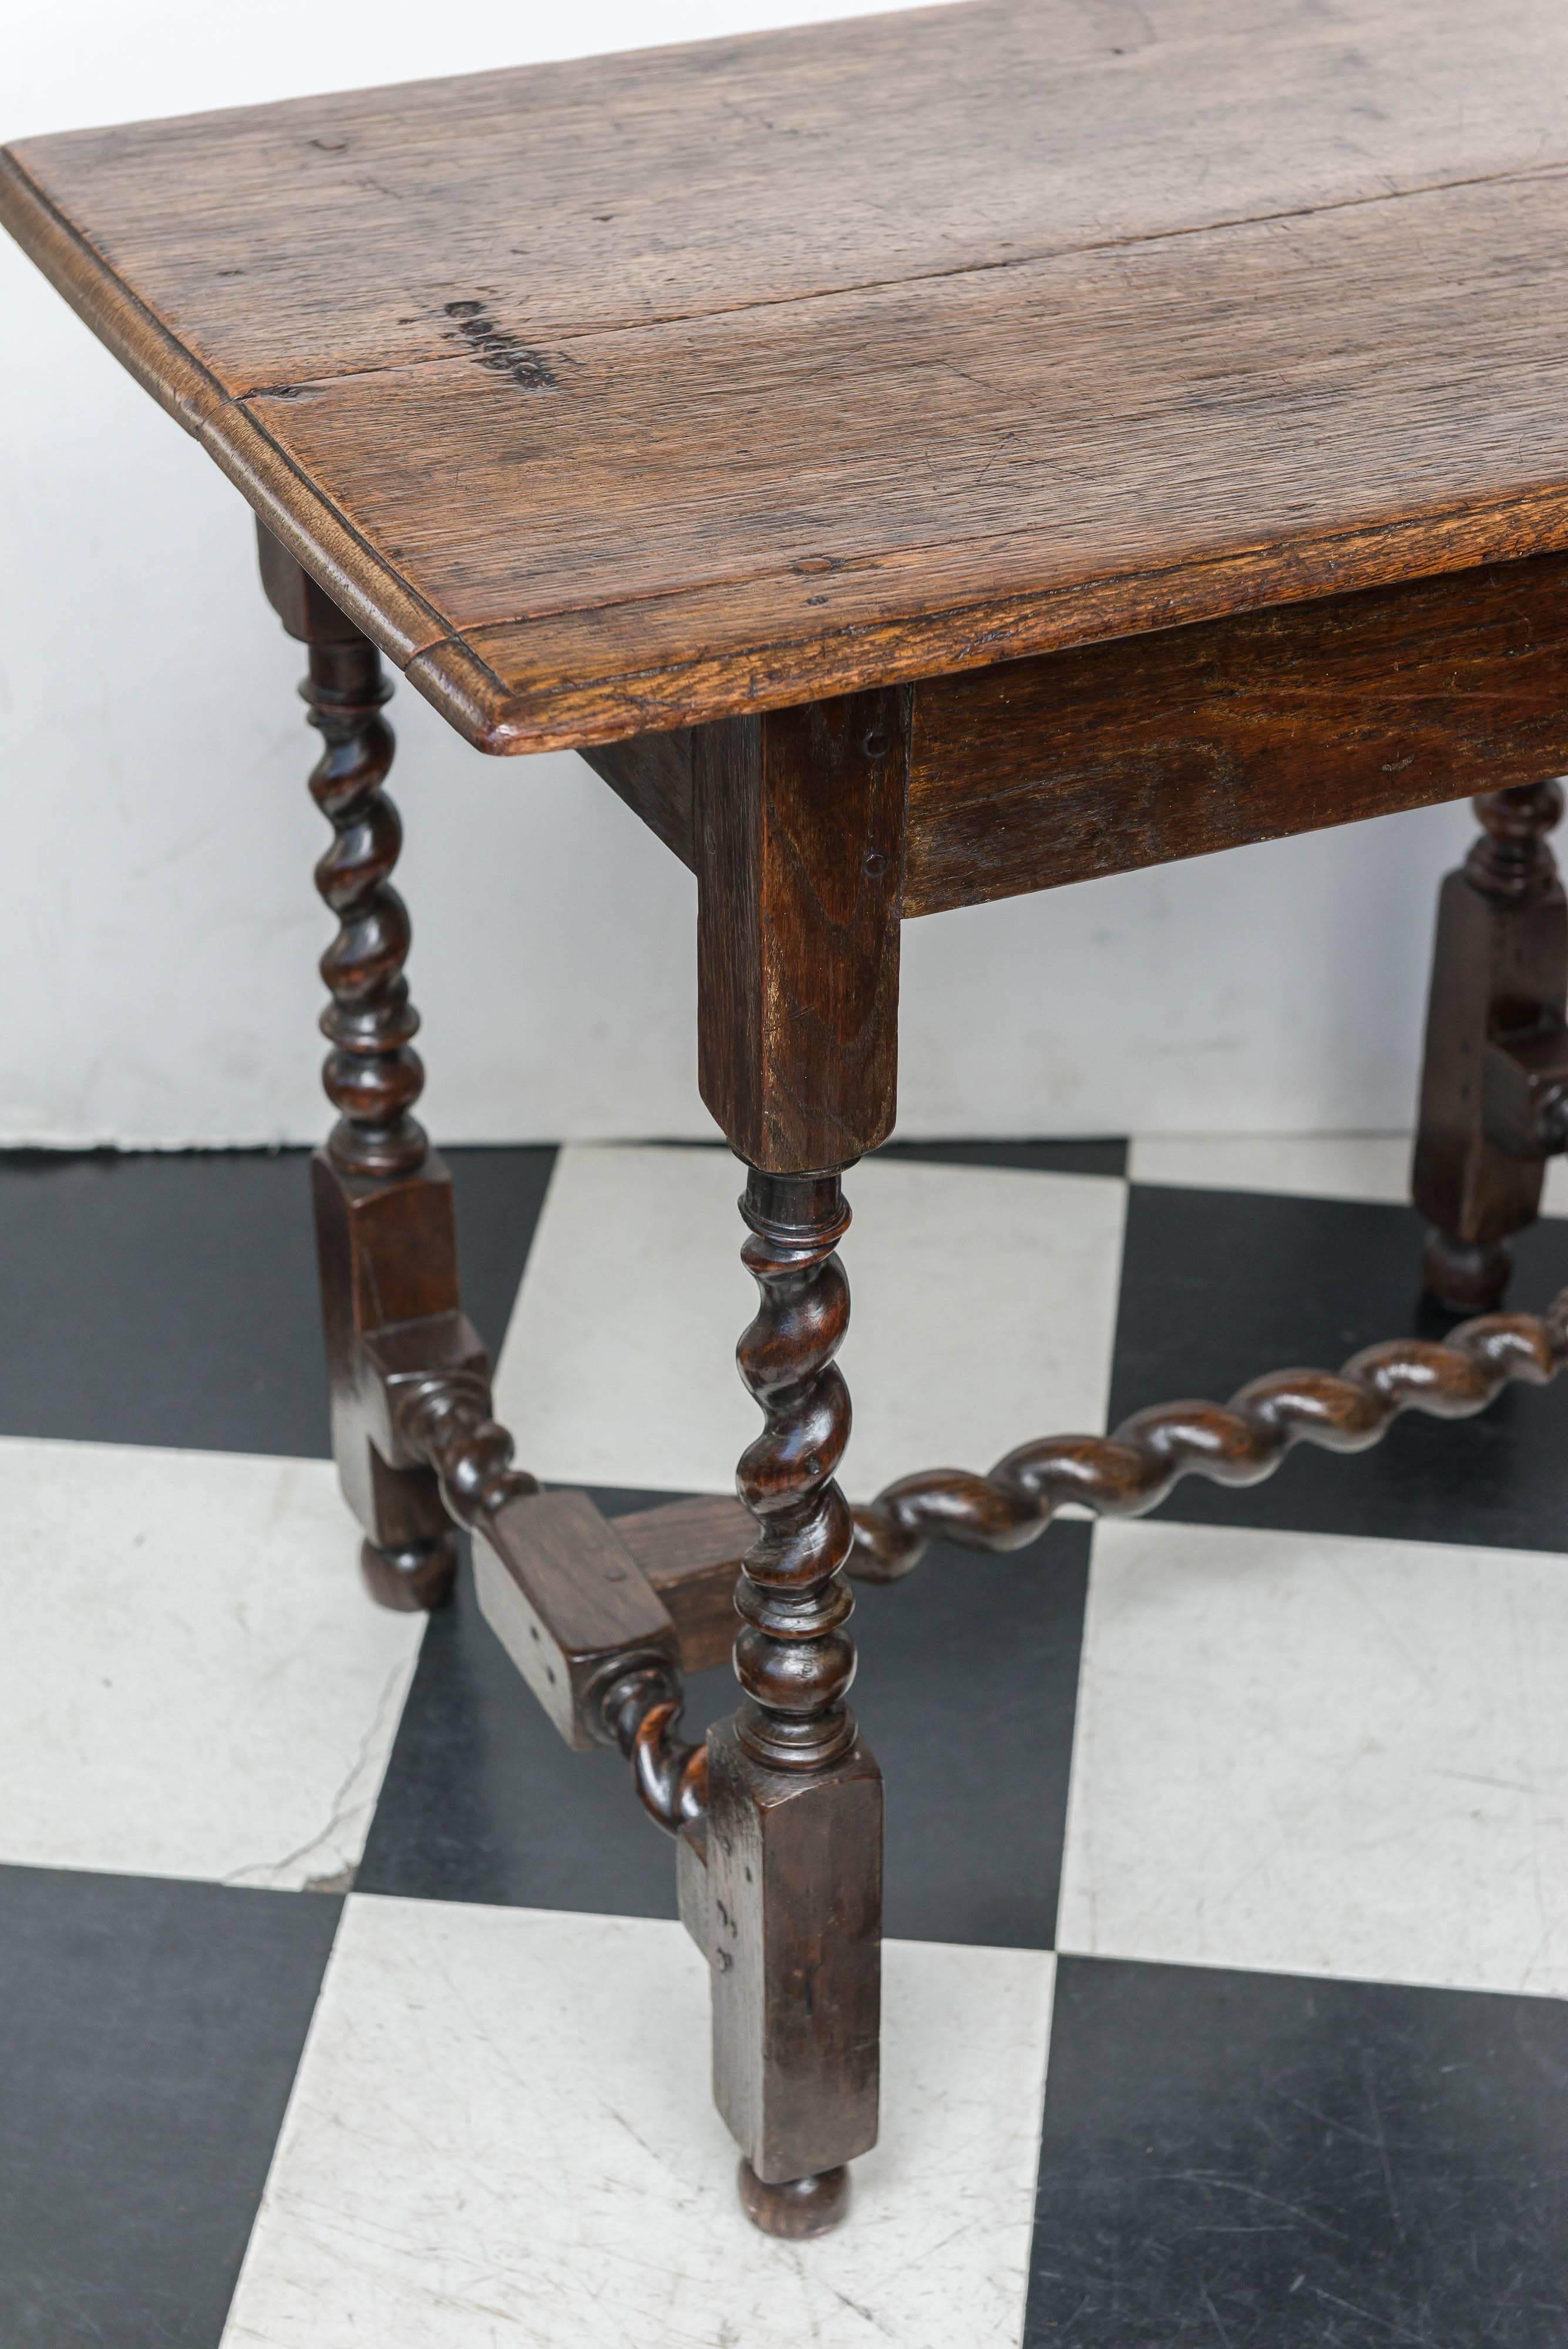 A mid-Georgian twist turned oak side or sofa table, good scale, circa 1750
A good rectangular form of shallow depth. Excellent versatile size for a side, hall or sofa table.
Once having a drawer, now there is none. The old two board top showing